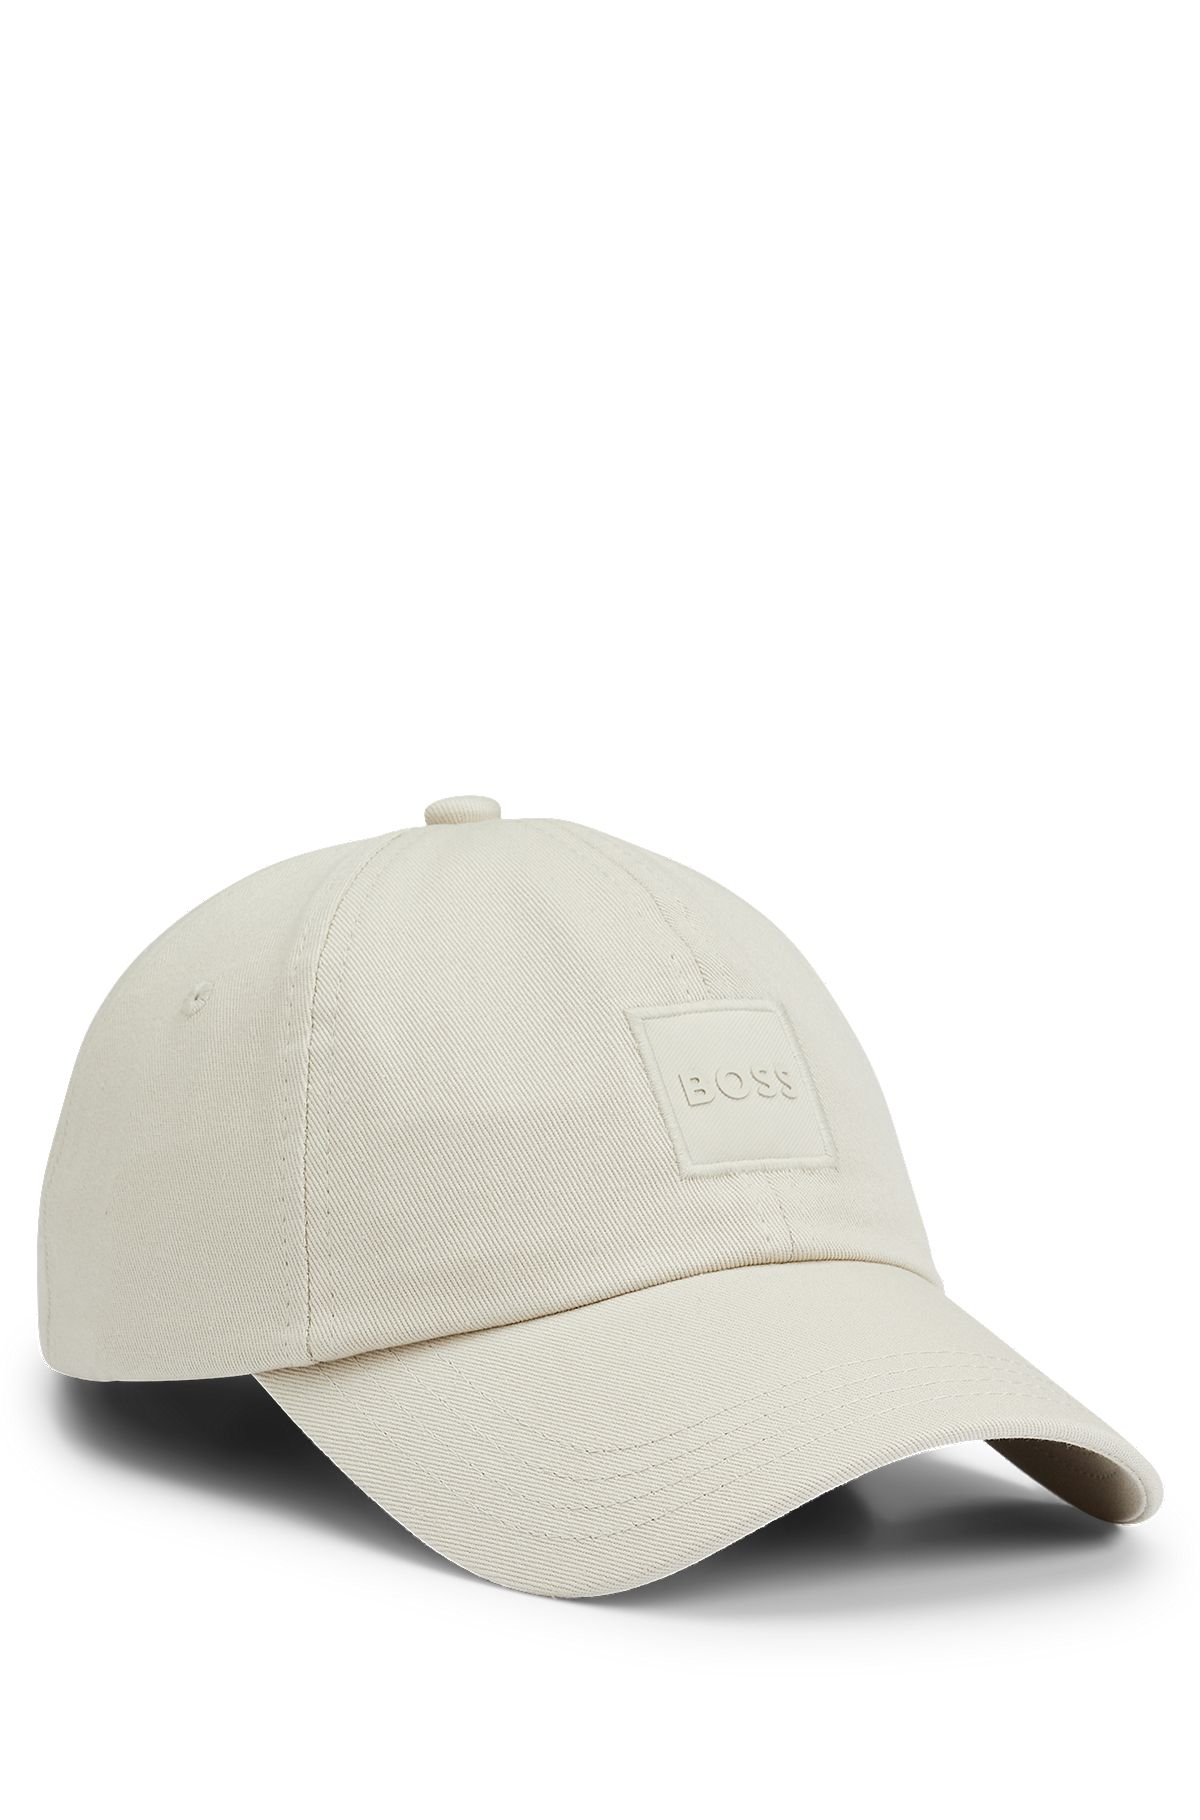 BOSS - Cotton-twill logo tonal cap patch with